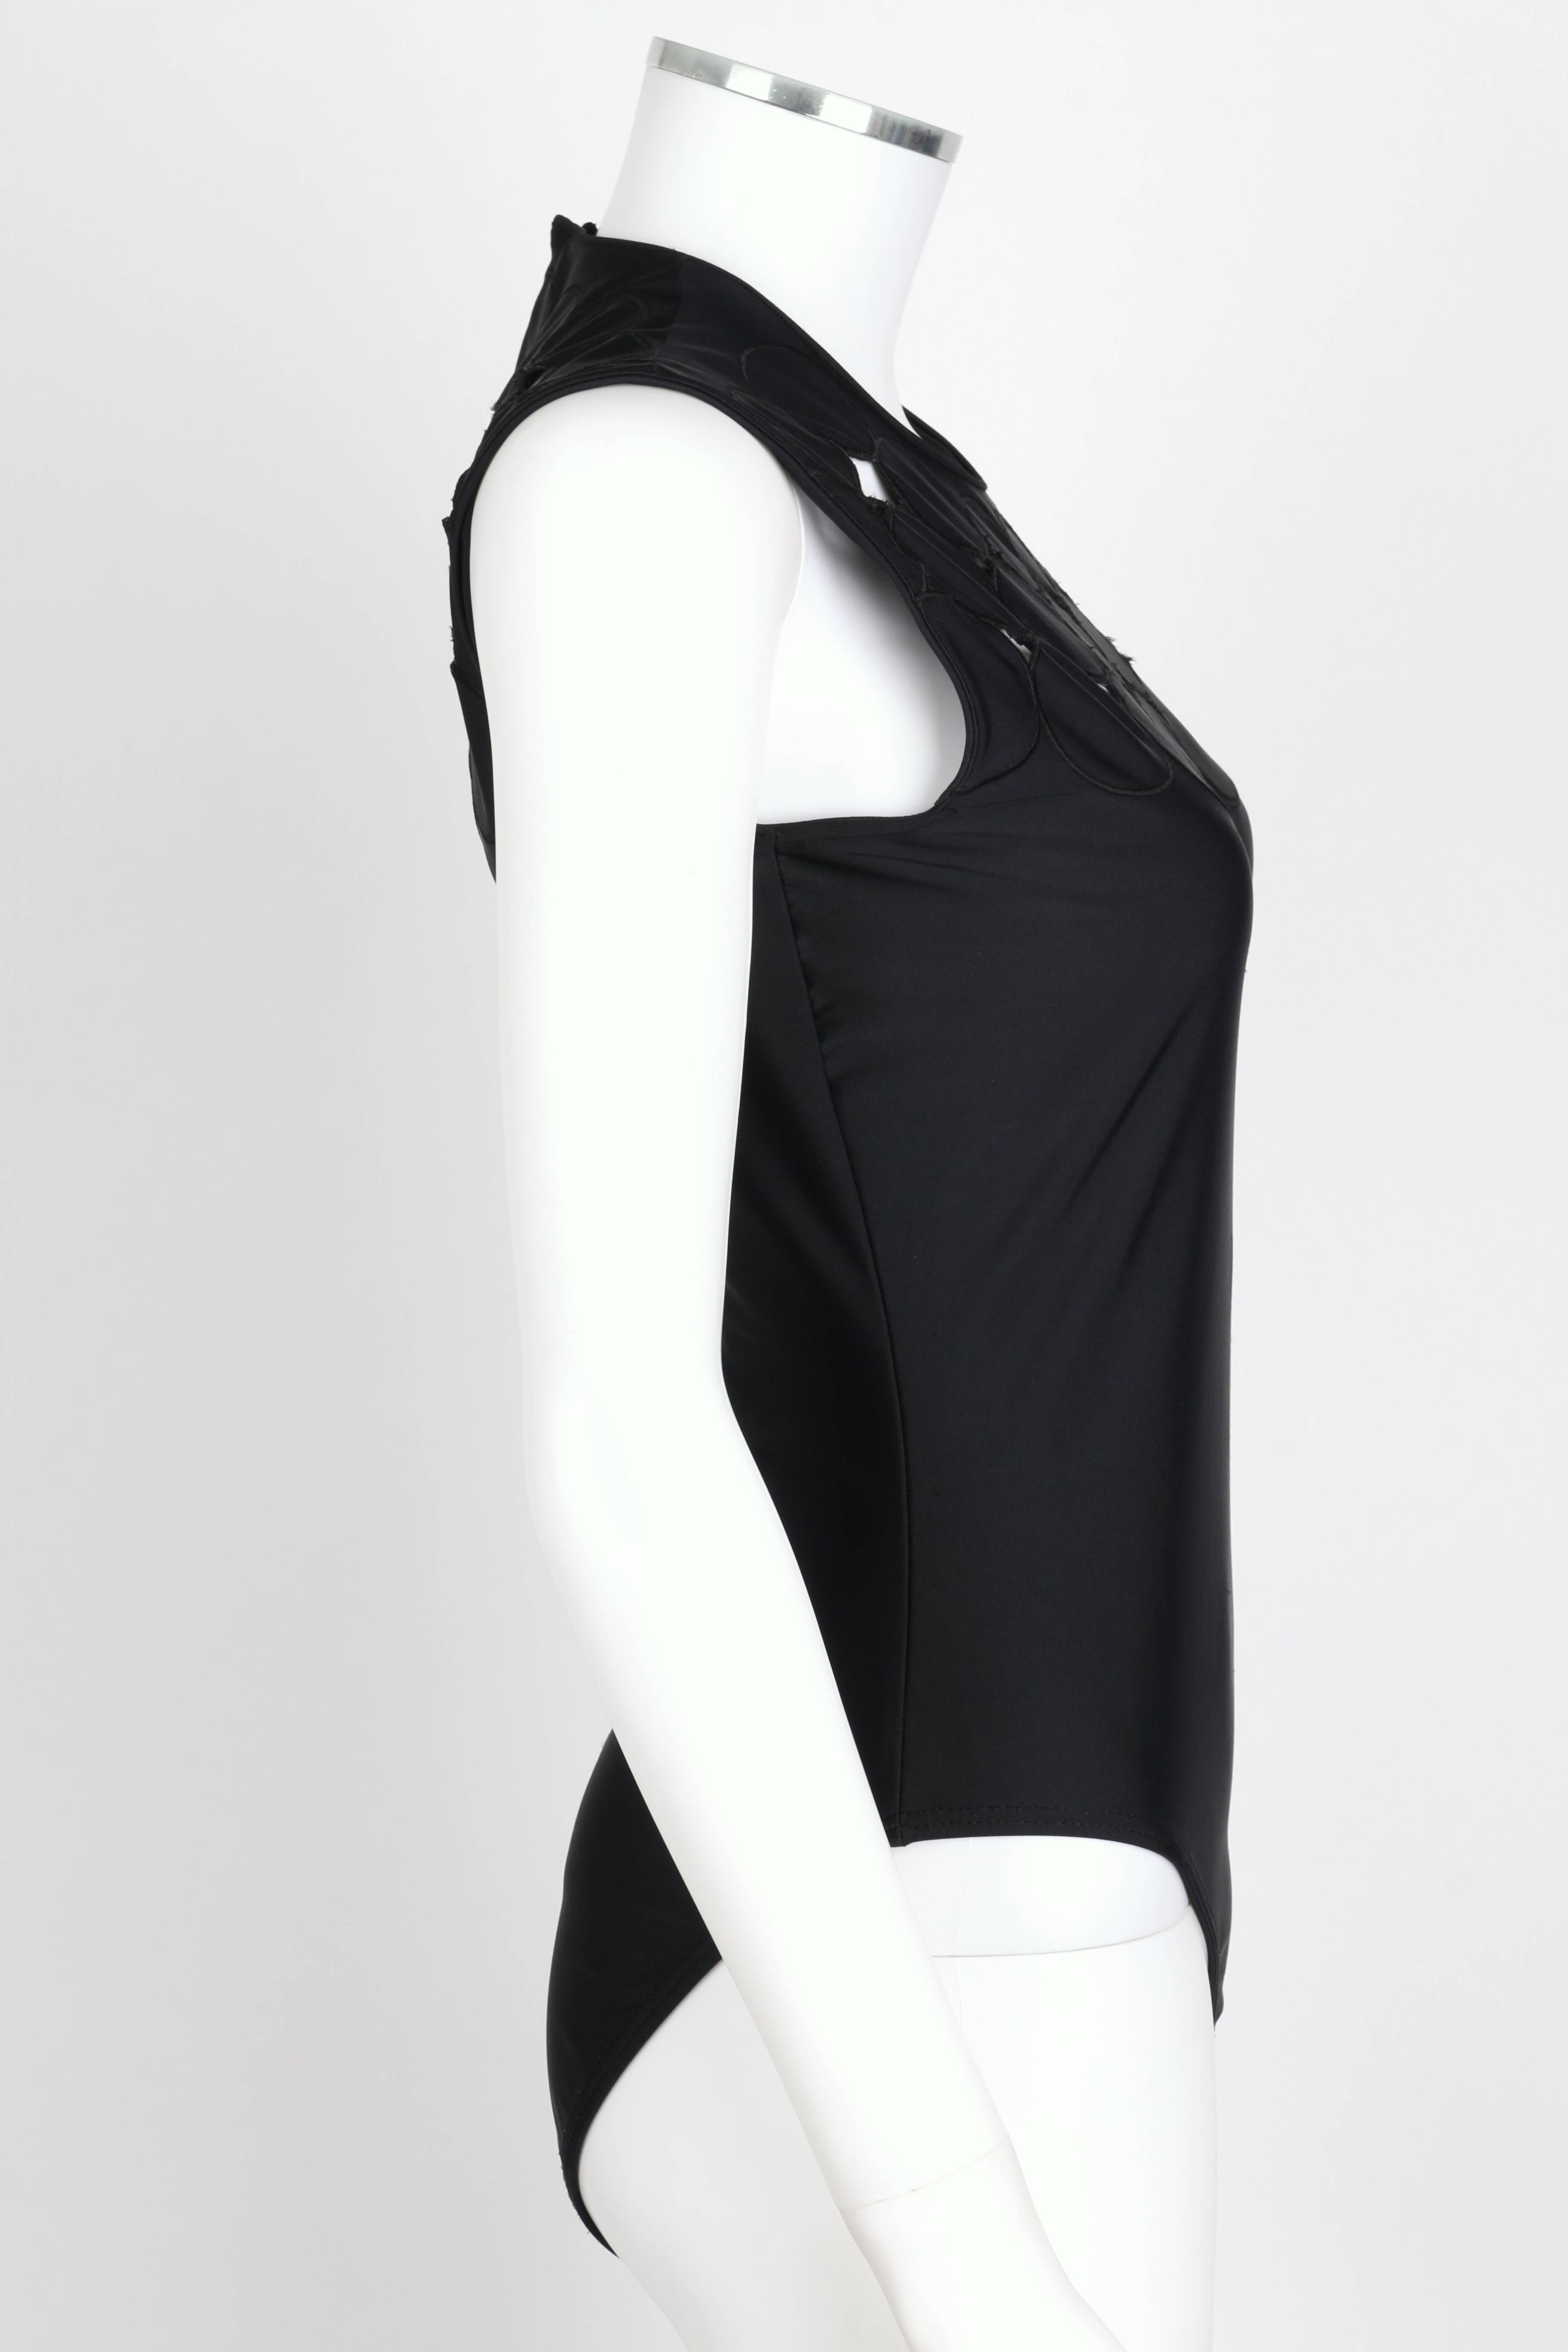 GIANNI VERSACE COUTURE S/S 1994 Black Sleeveless Circle Cutout Bodysuit Top In Good Condition For Sale In Thiensville, WI